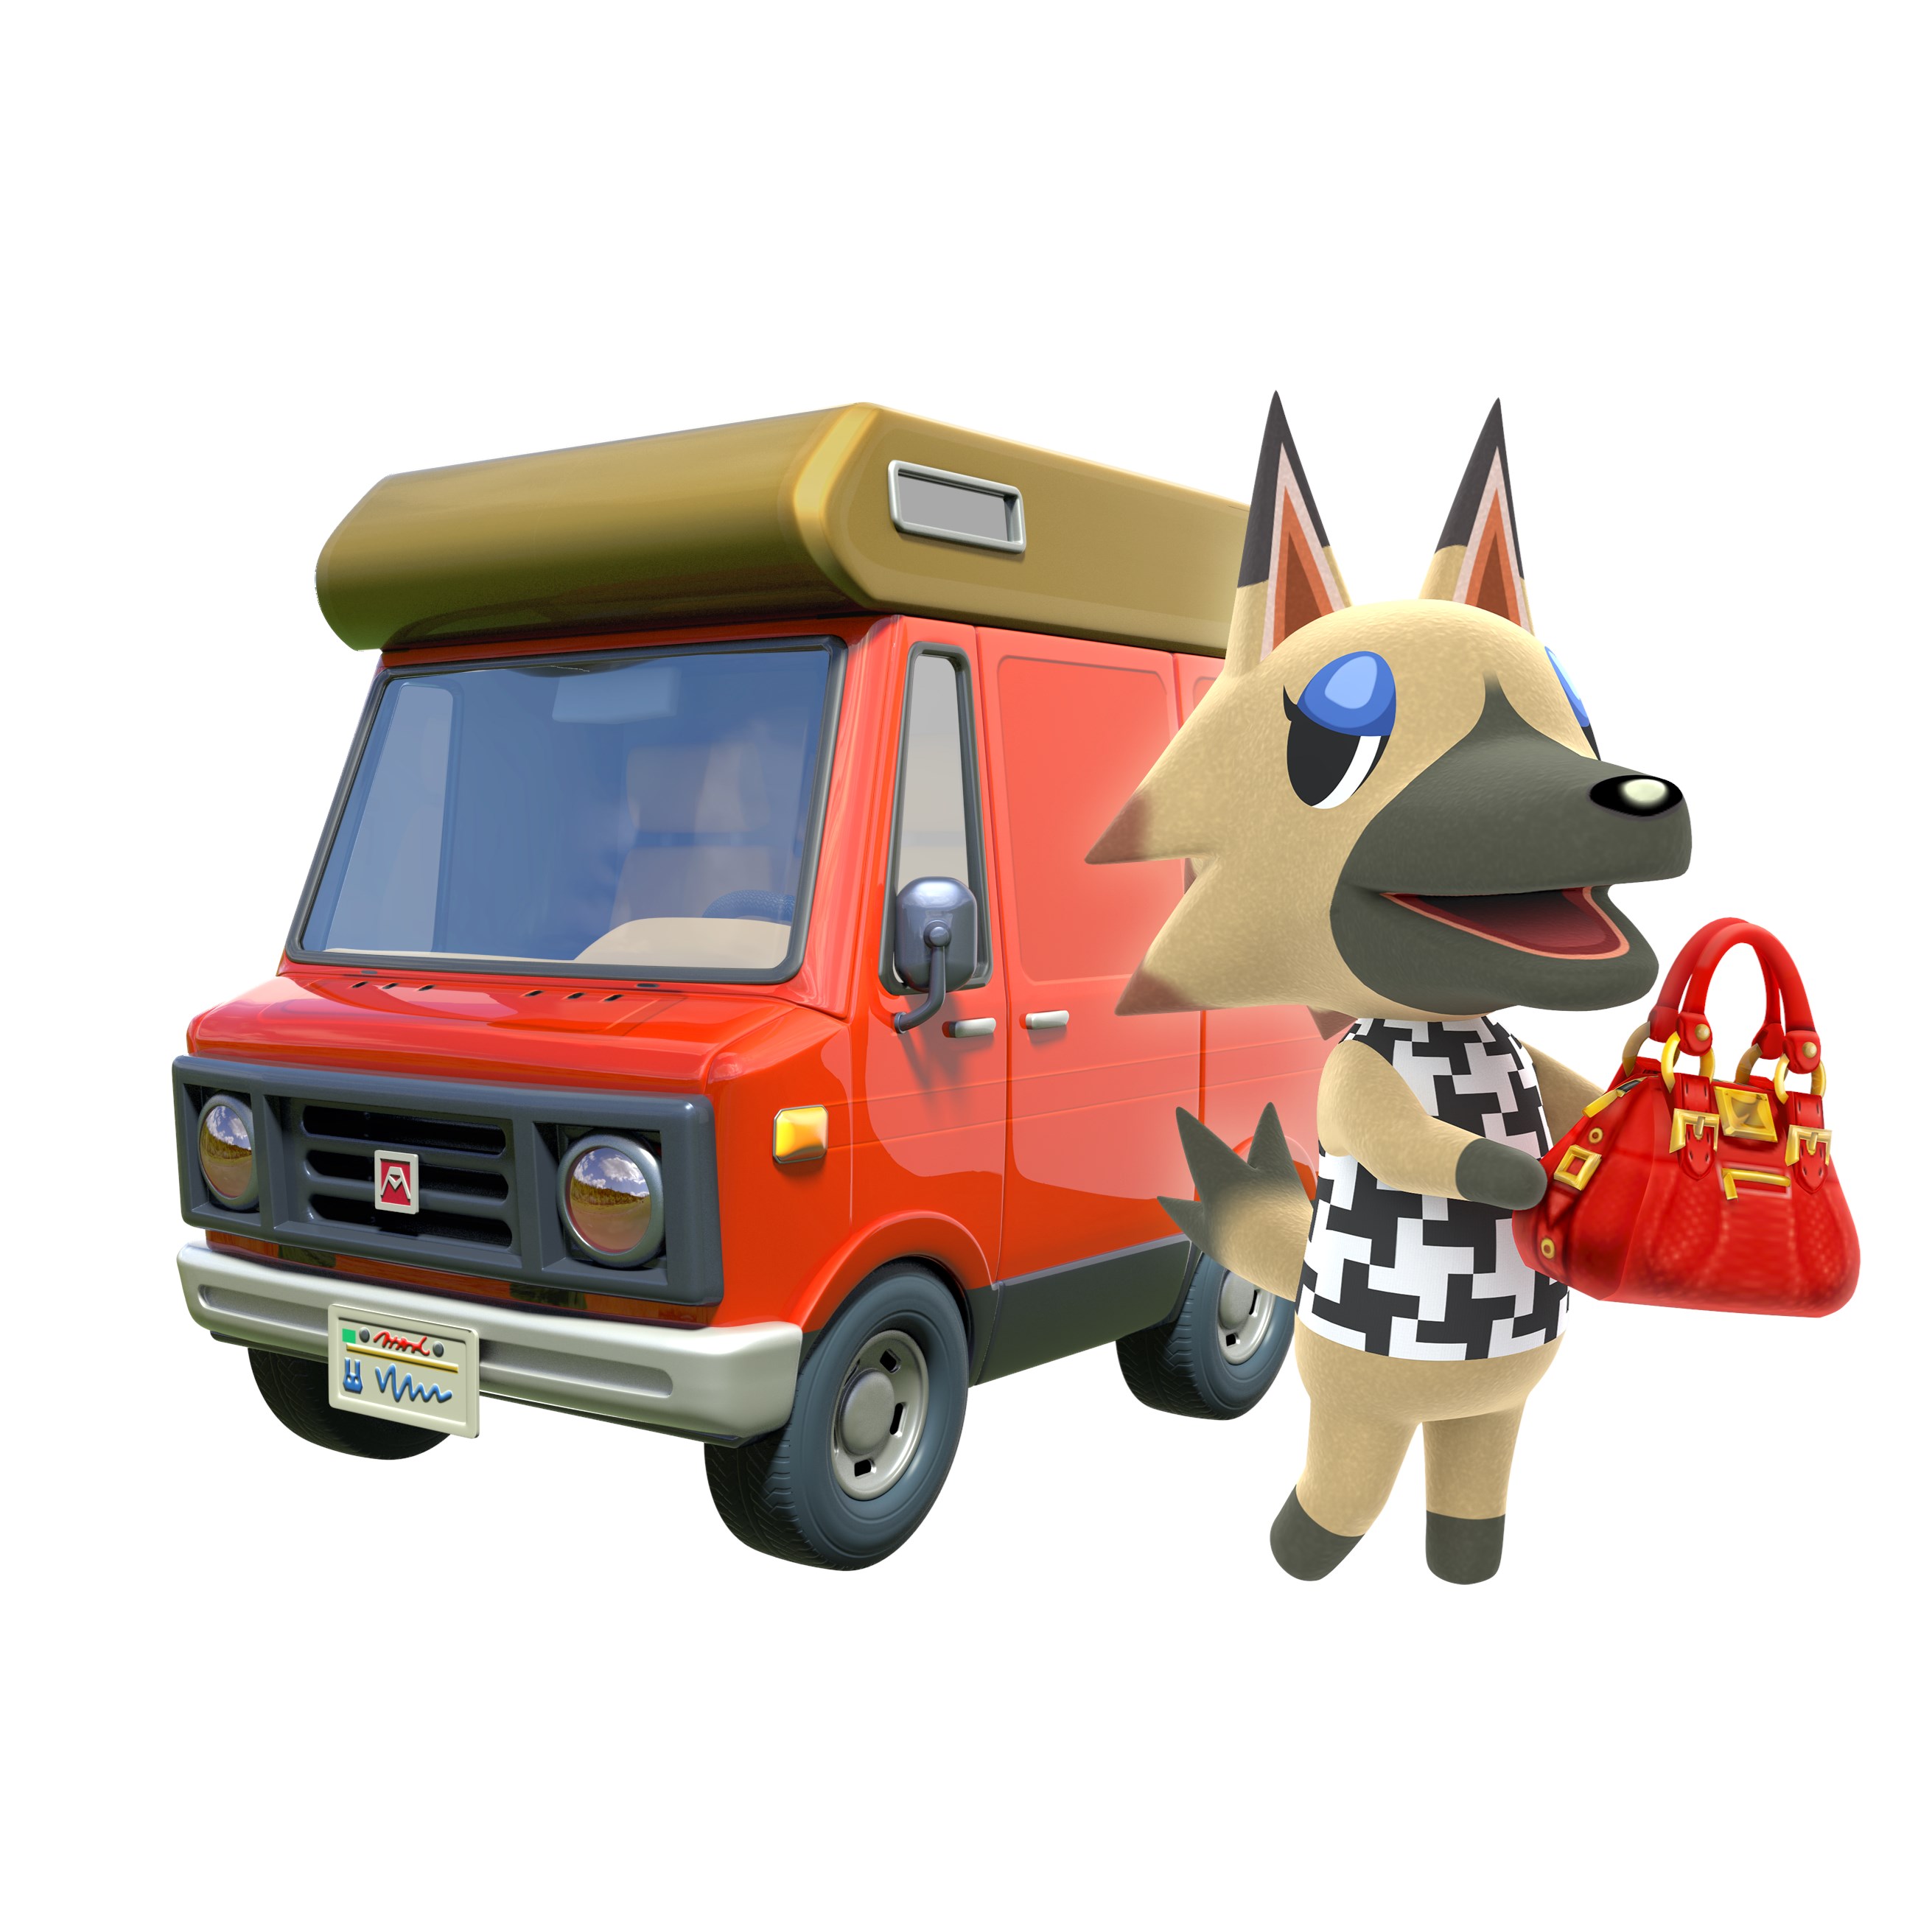 3DS_ACNL-Welcomeamiibo_RV-char_01_png_jpgcopy